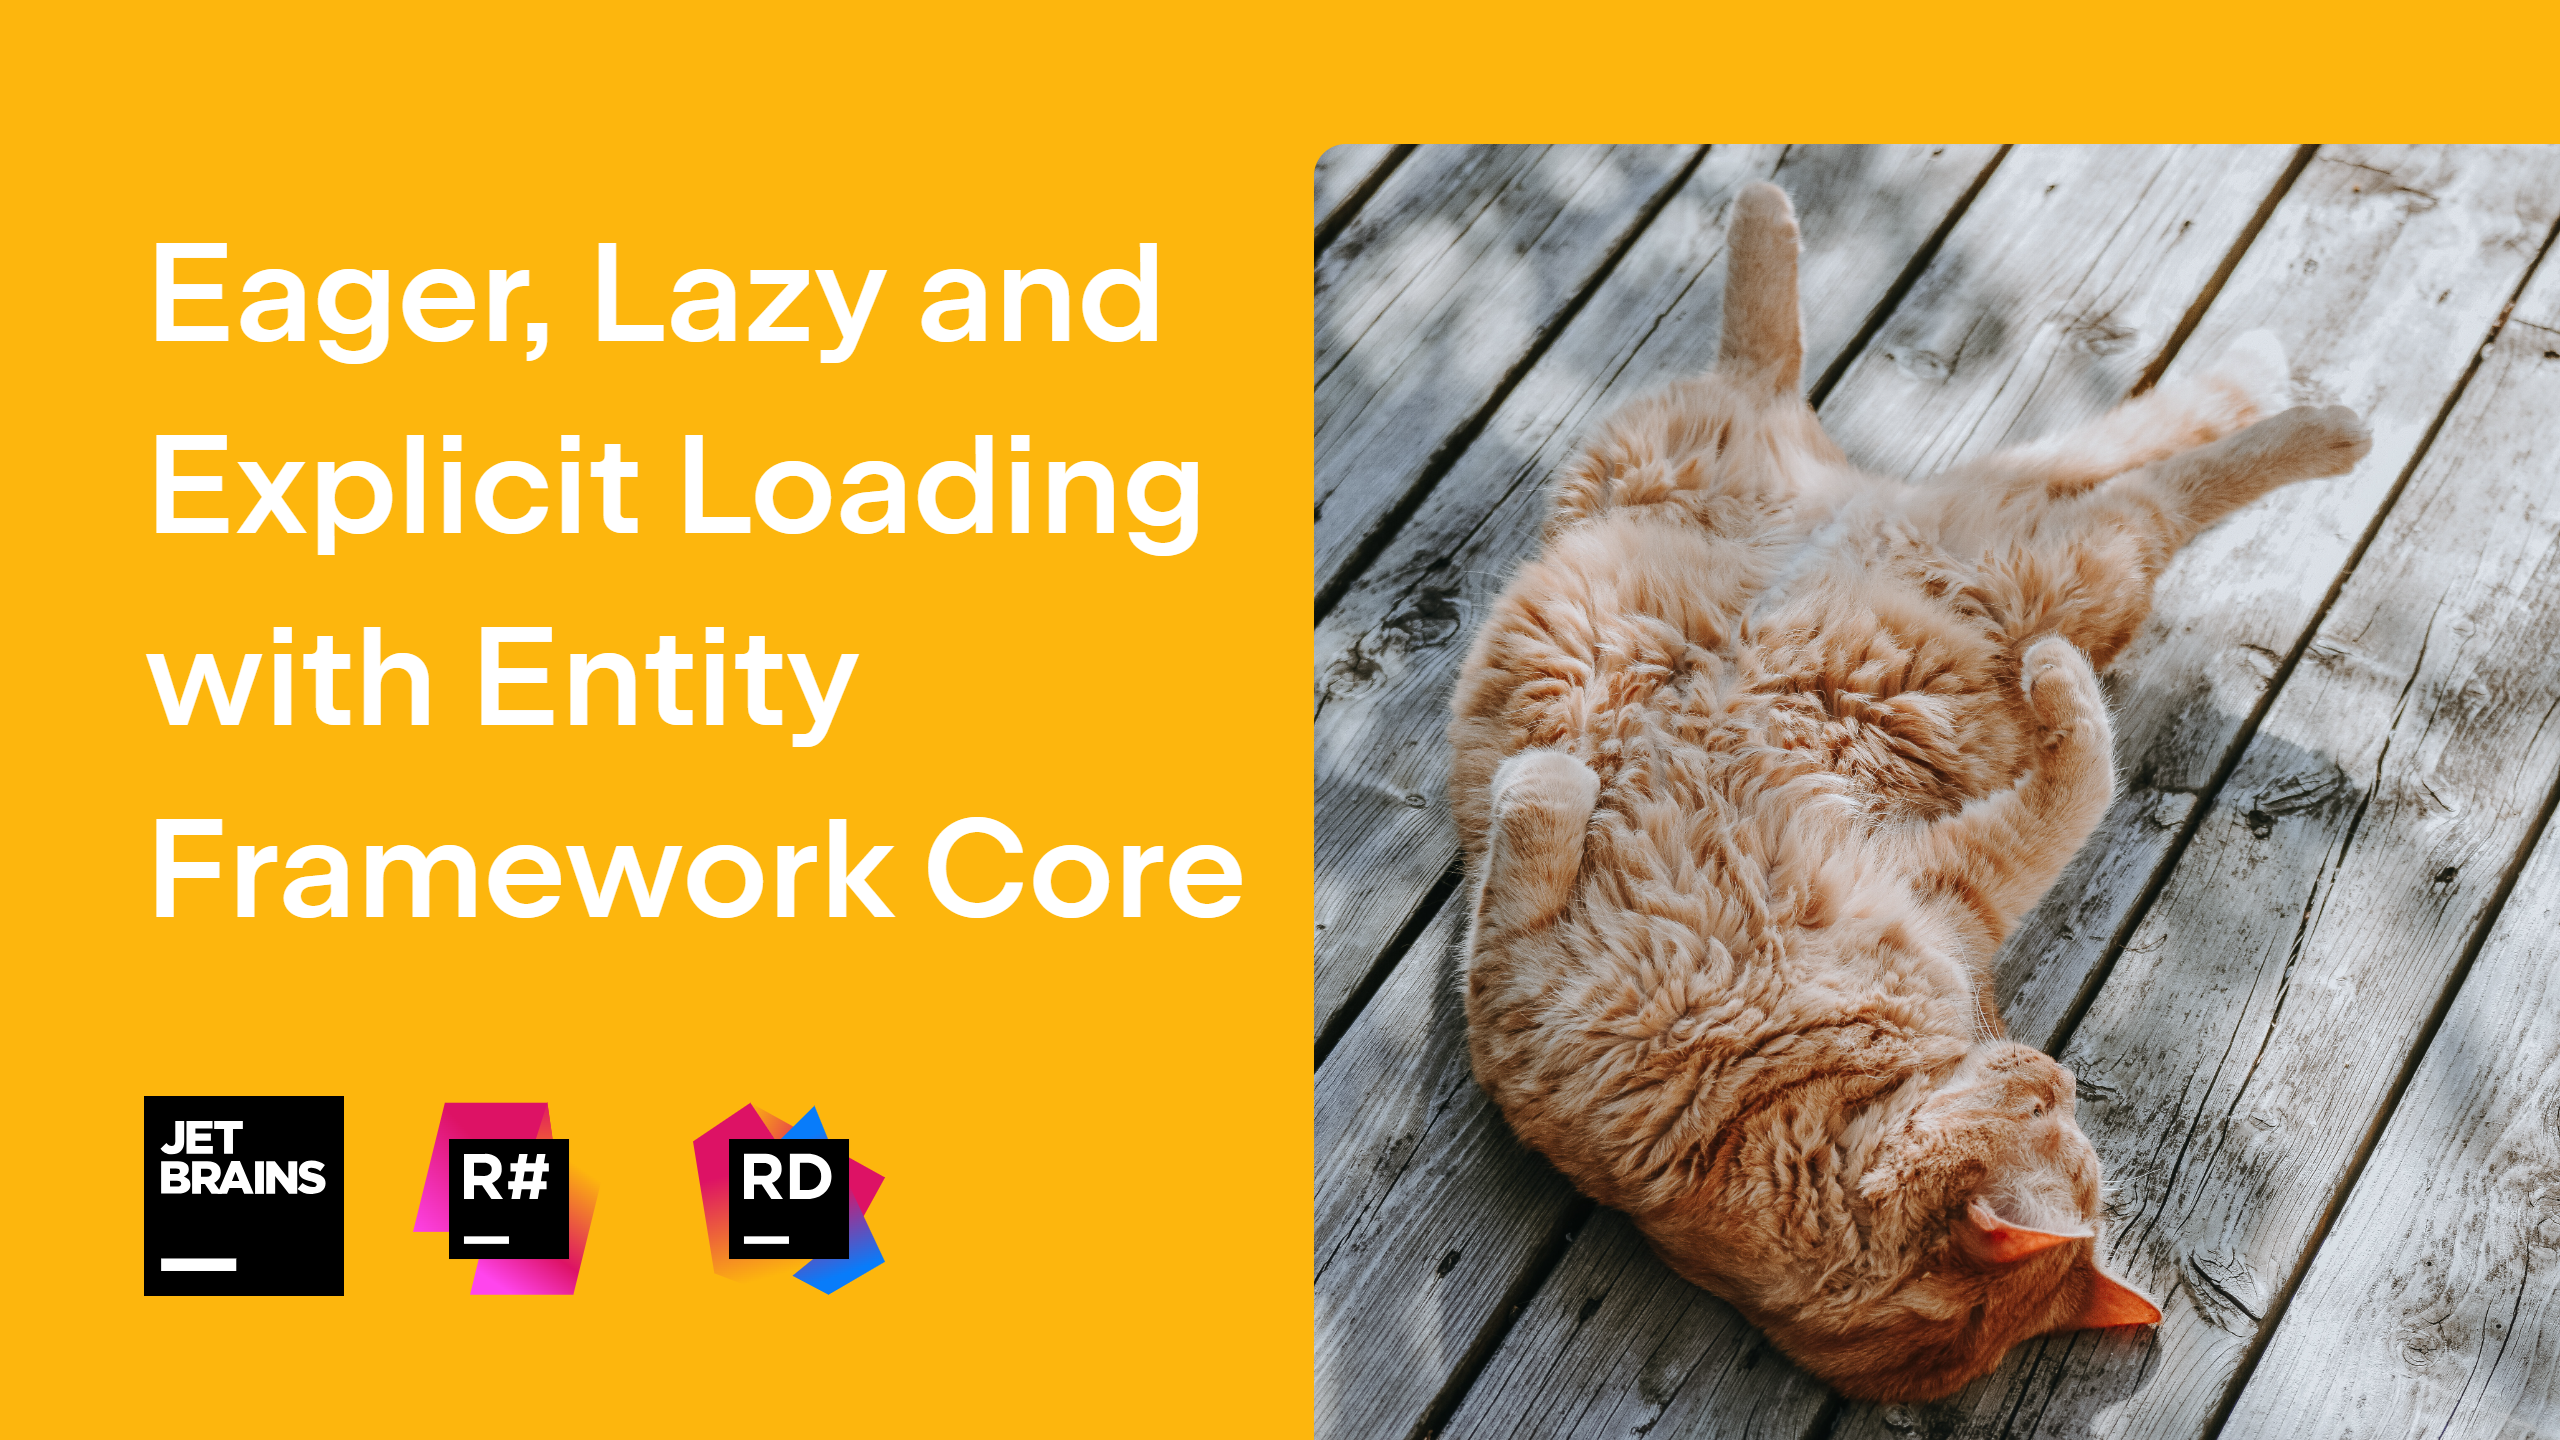 Eager, Lazy and Explicit Loading with Entity Framework Core | The .NET Tools Blog